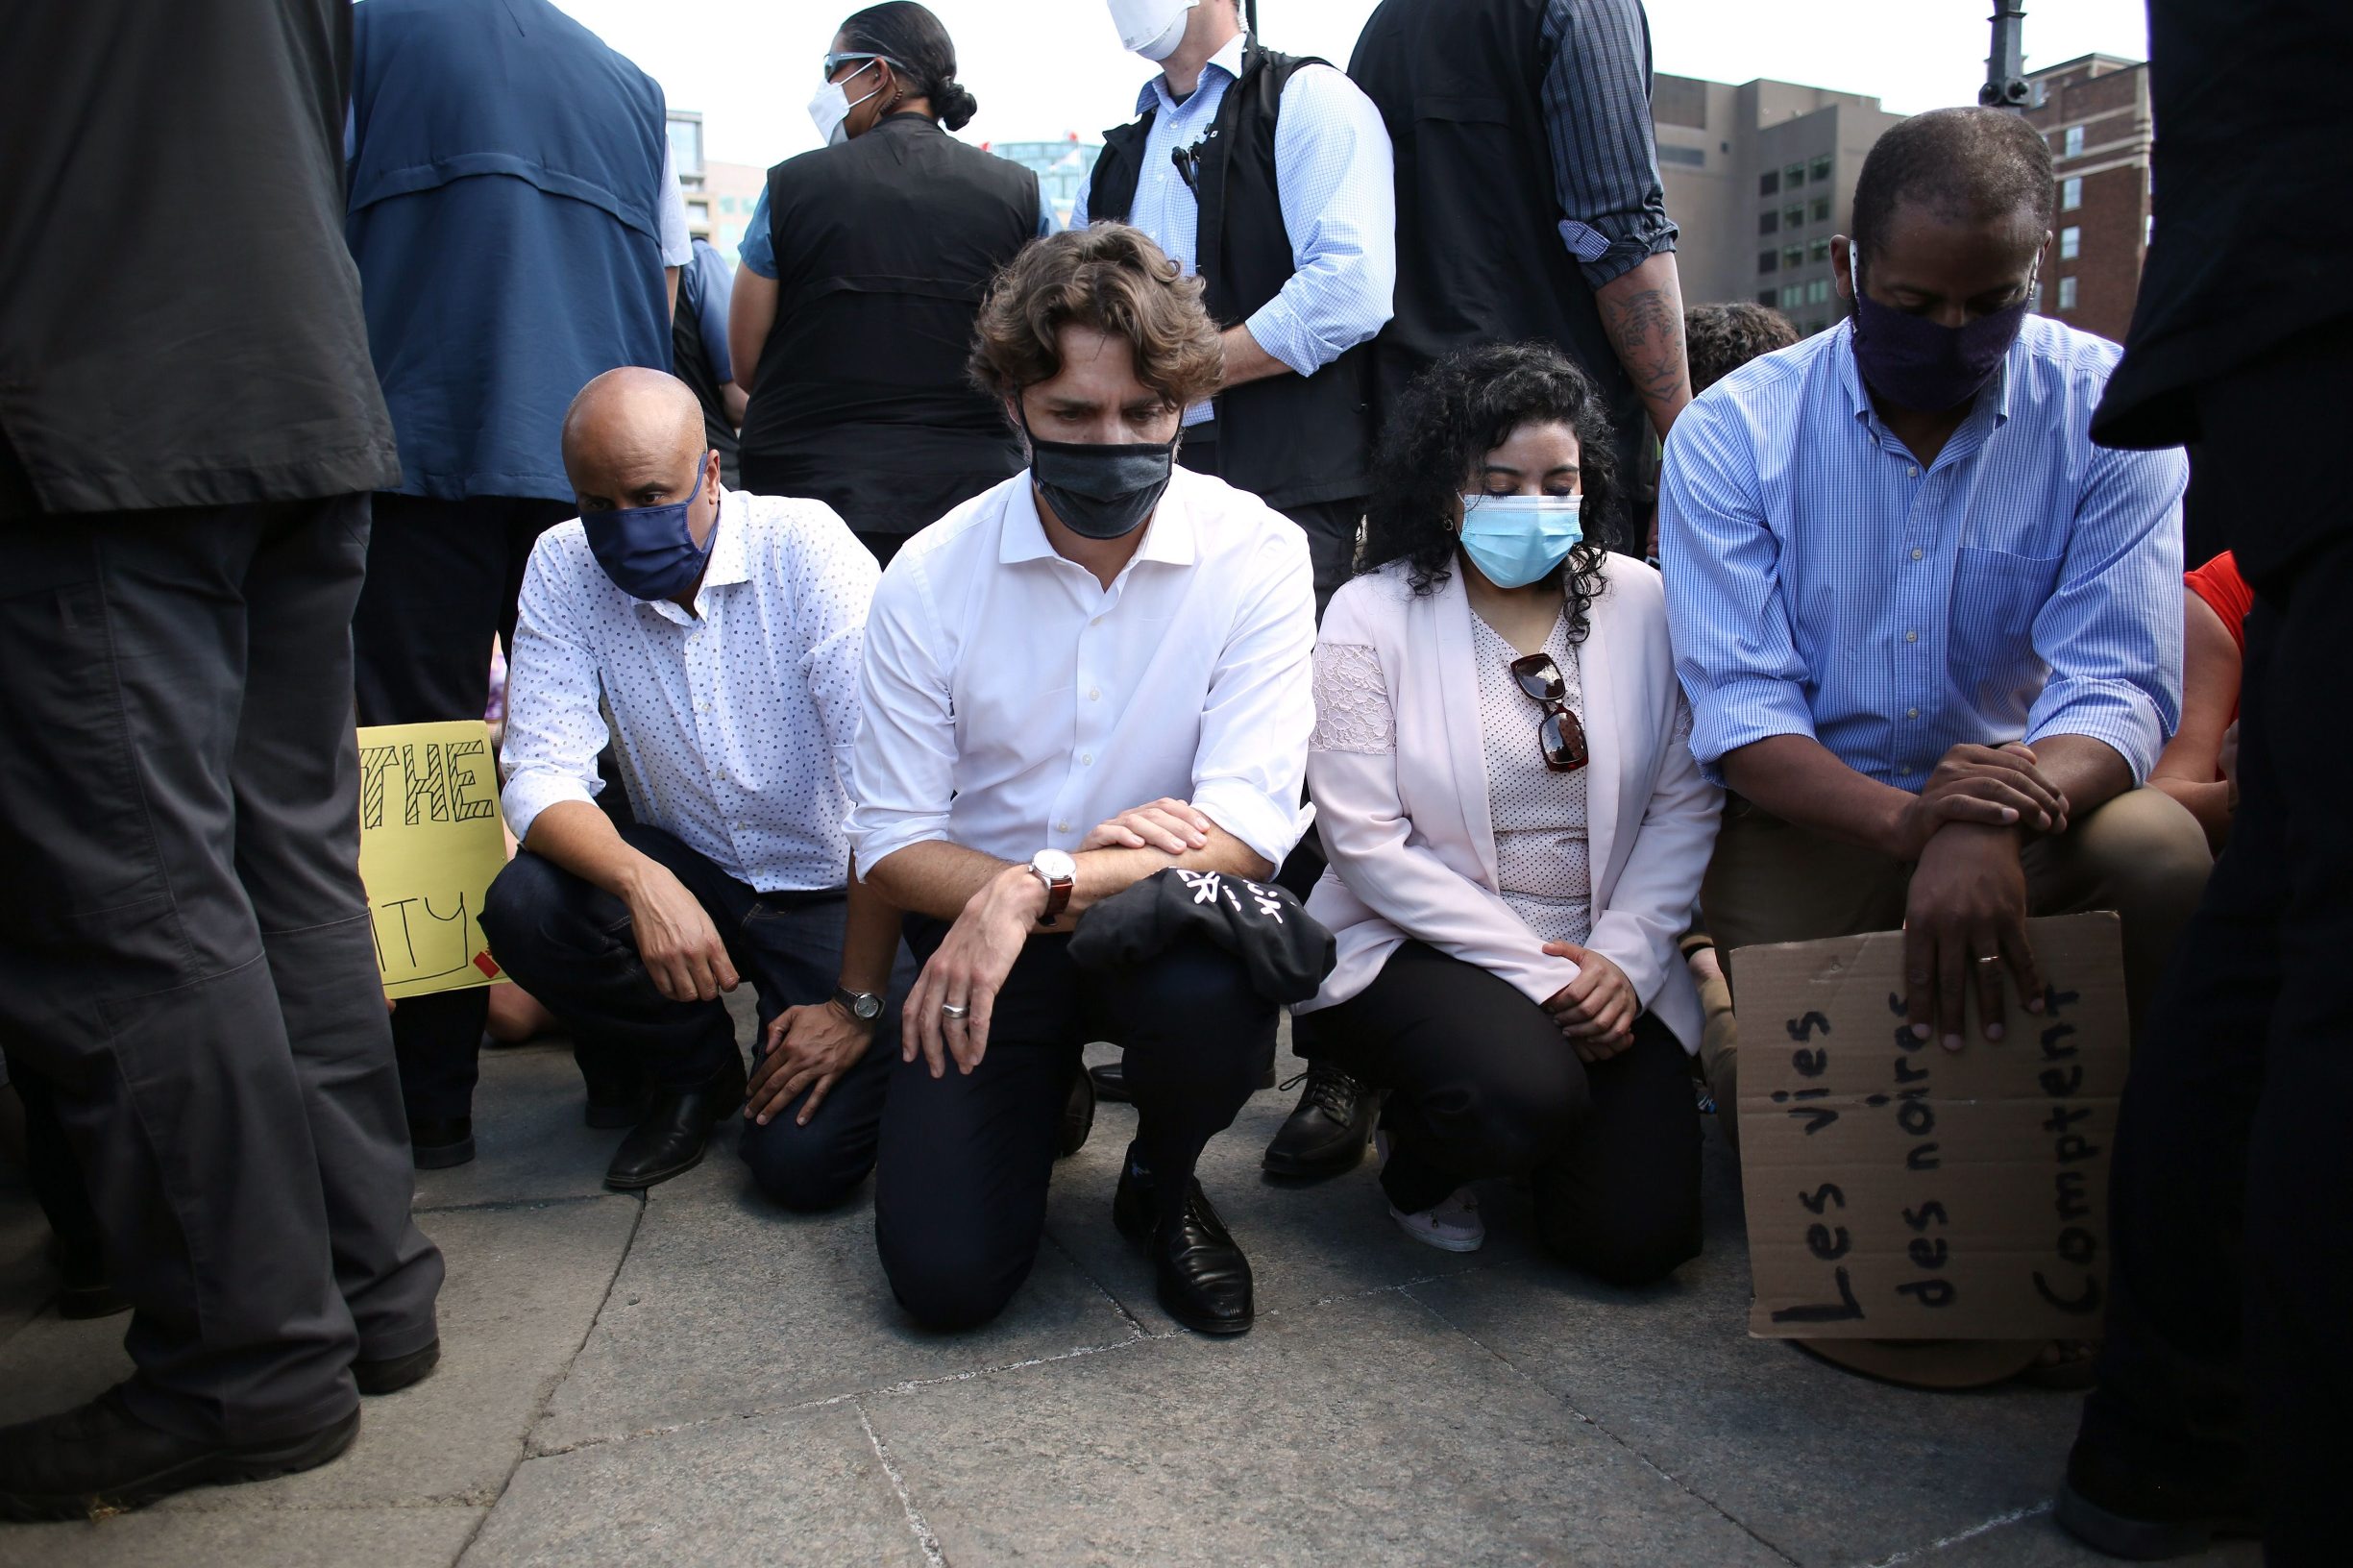 Canadadian Prime Minister Justin Trudeau (2nd L) takes a knee during in a Black Lives Matter protest on Parliament Hill June 5, 2020 in Ottawa, Canada. - Canadian Prime Minister Justin Trudeau appeared at a loss for words on June 2, pausing for 20 seconds when pressed for this thoughts on US President Donald Trump's threat of military mobilization against violent US protests. (Photo by Dave Chan / AFP)